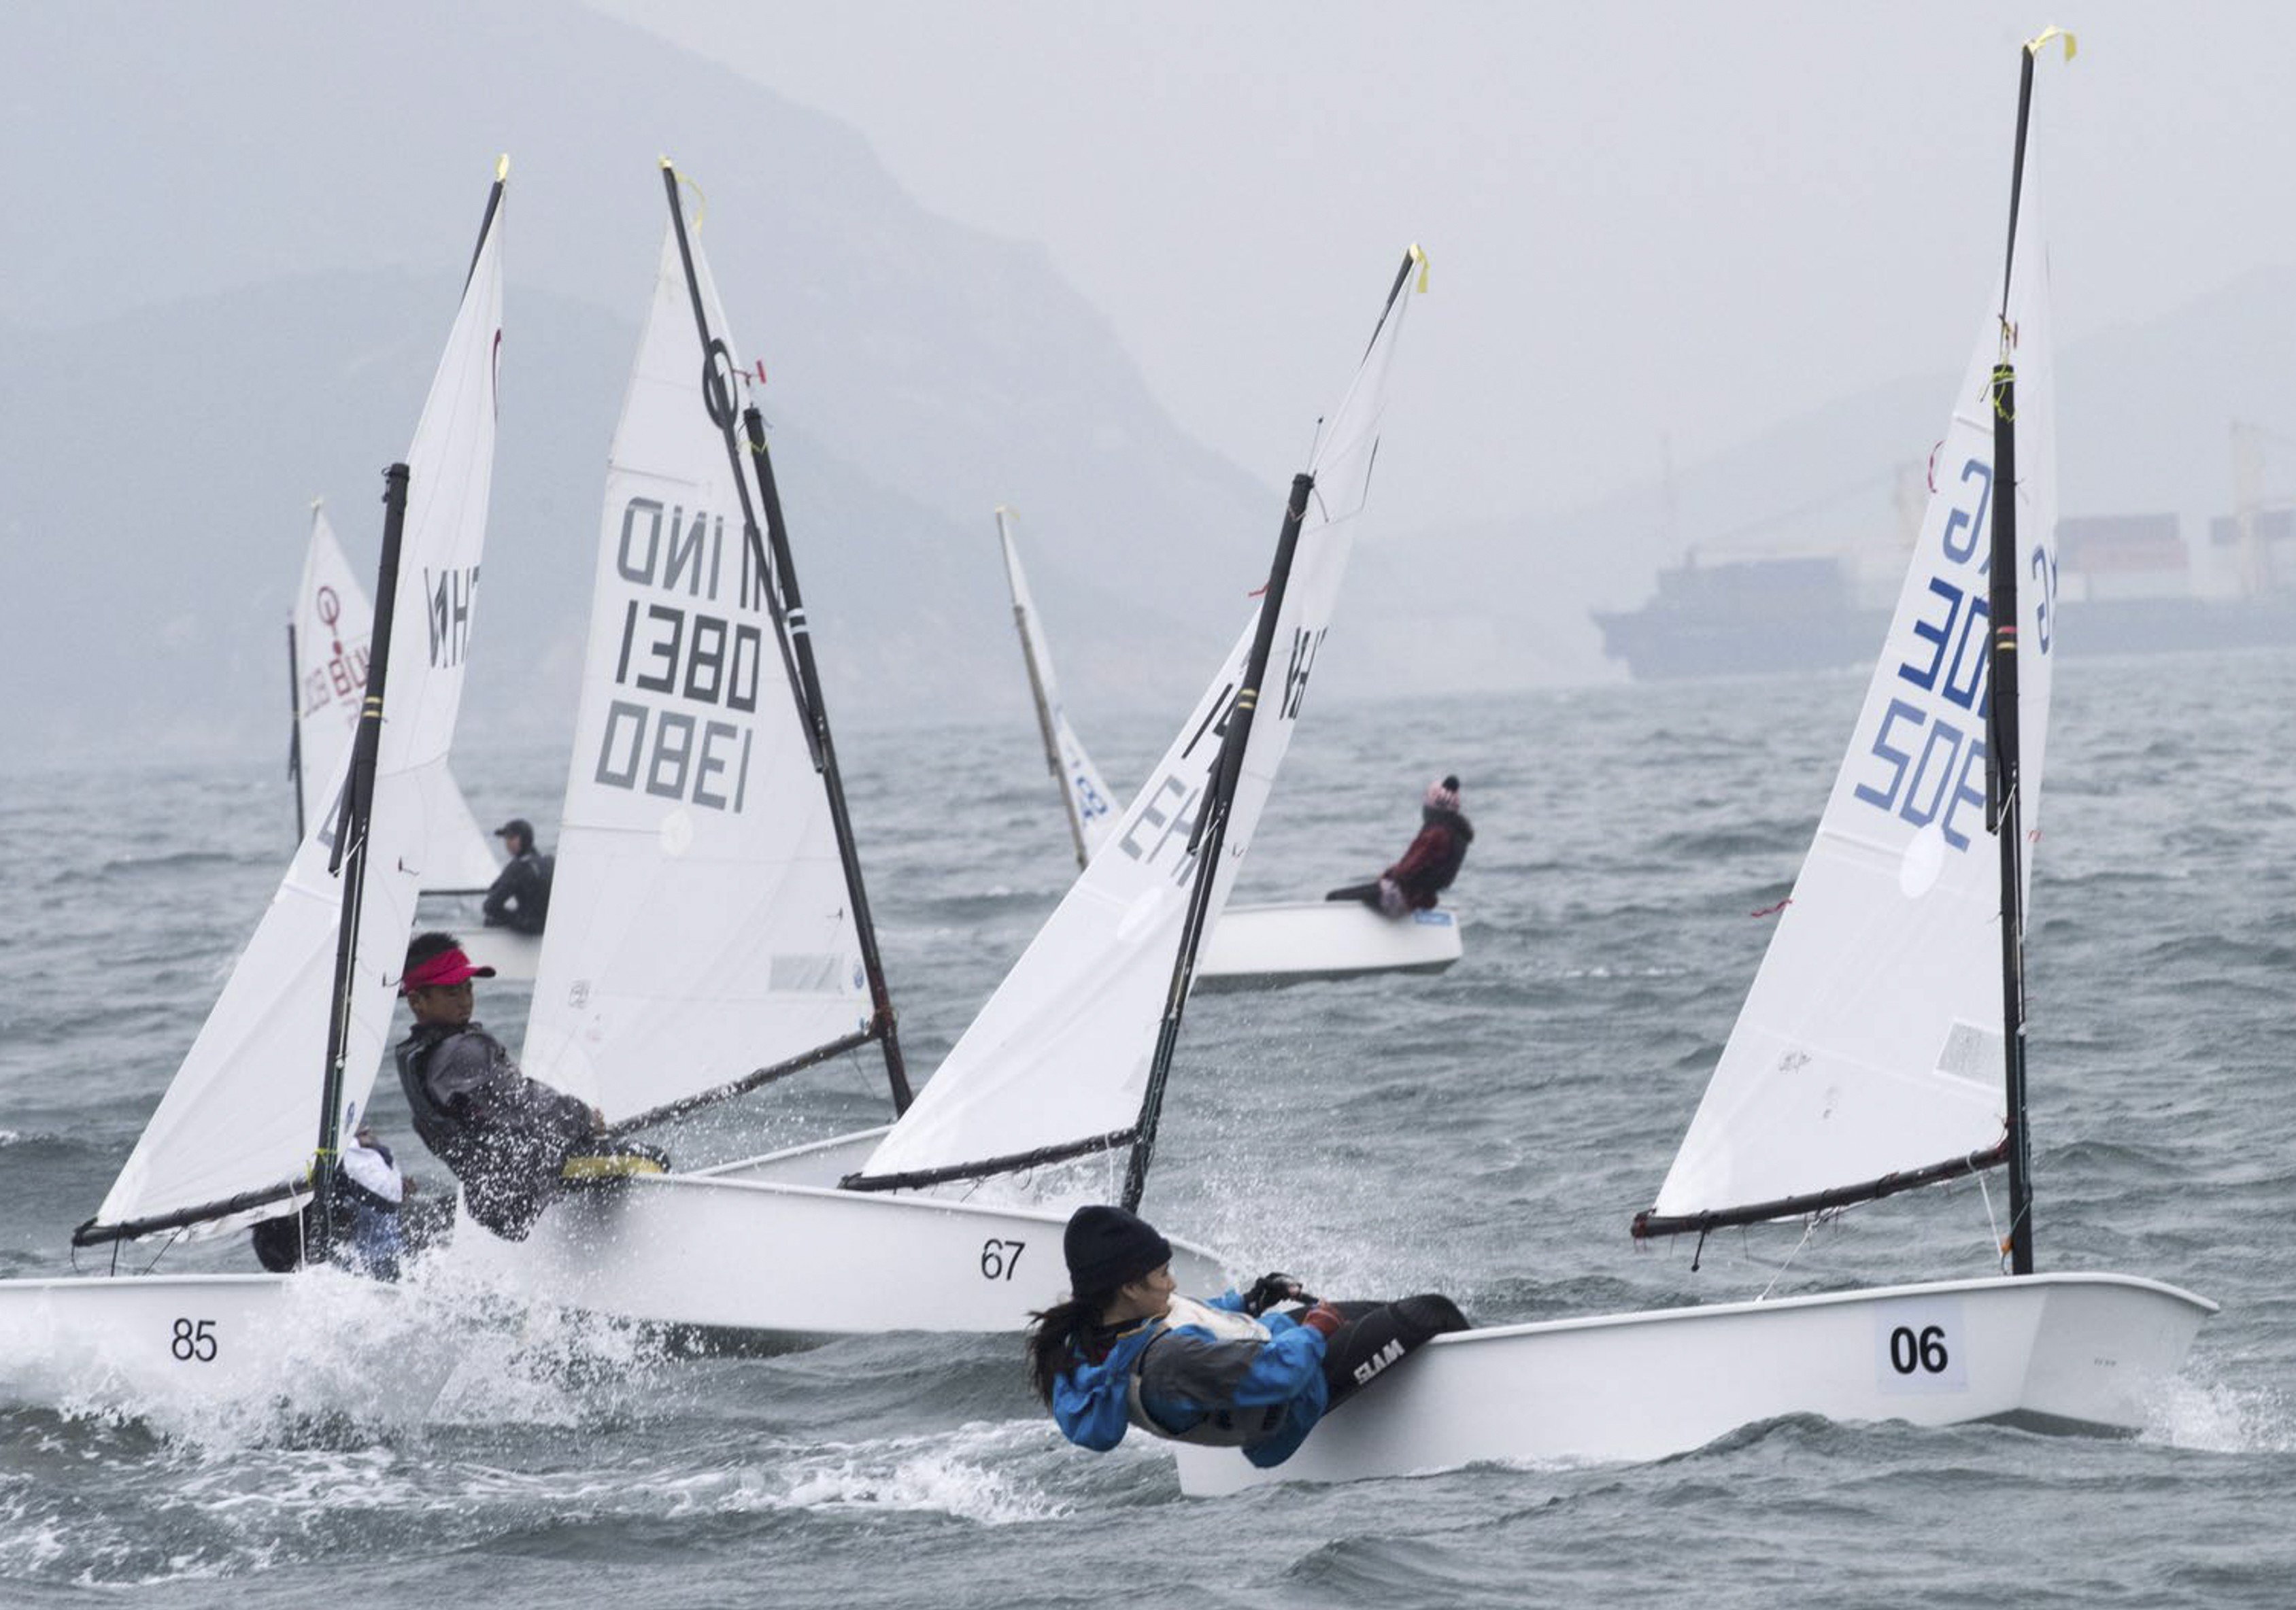 Hong Kong Race Week is part of the Youth Cup, where junior sailors compete in Optimists or Lasers around Asia. Photo: Hong Kong Optimist Dingy Sailing Association